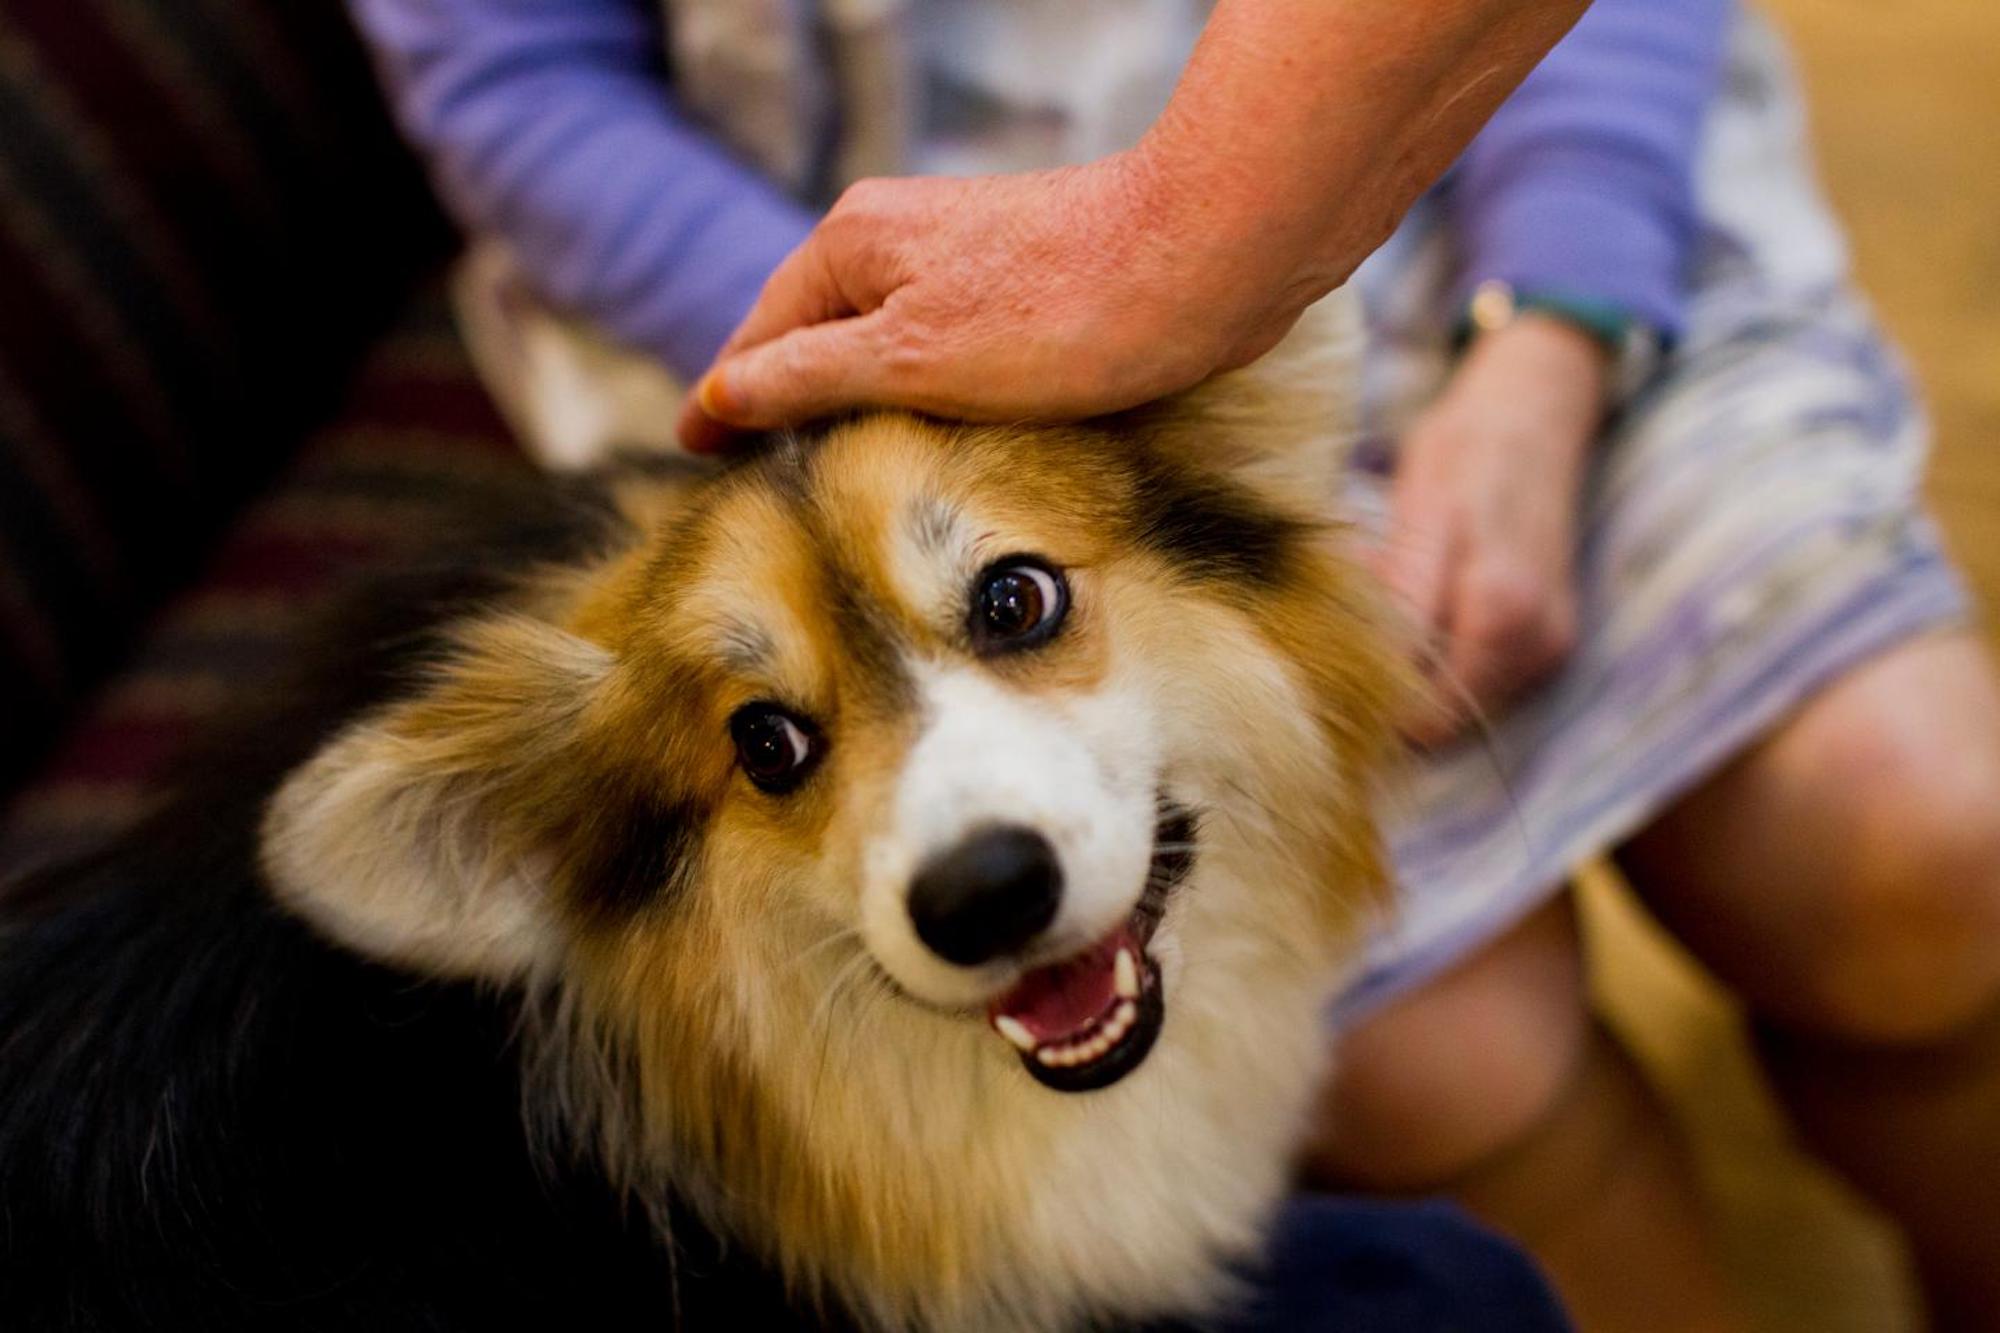 Pets offer health benefits but also have drawbacks, finds poll of older adults [Video]